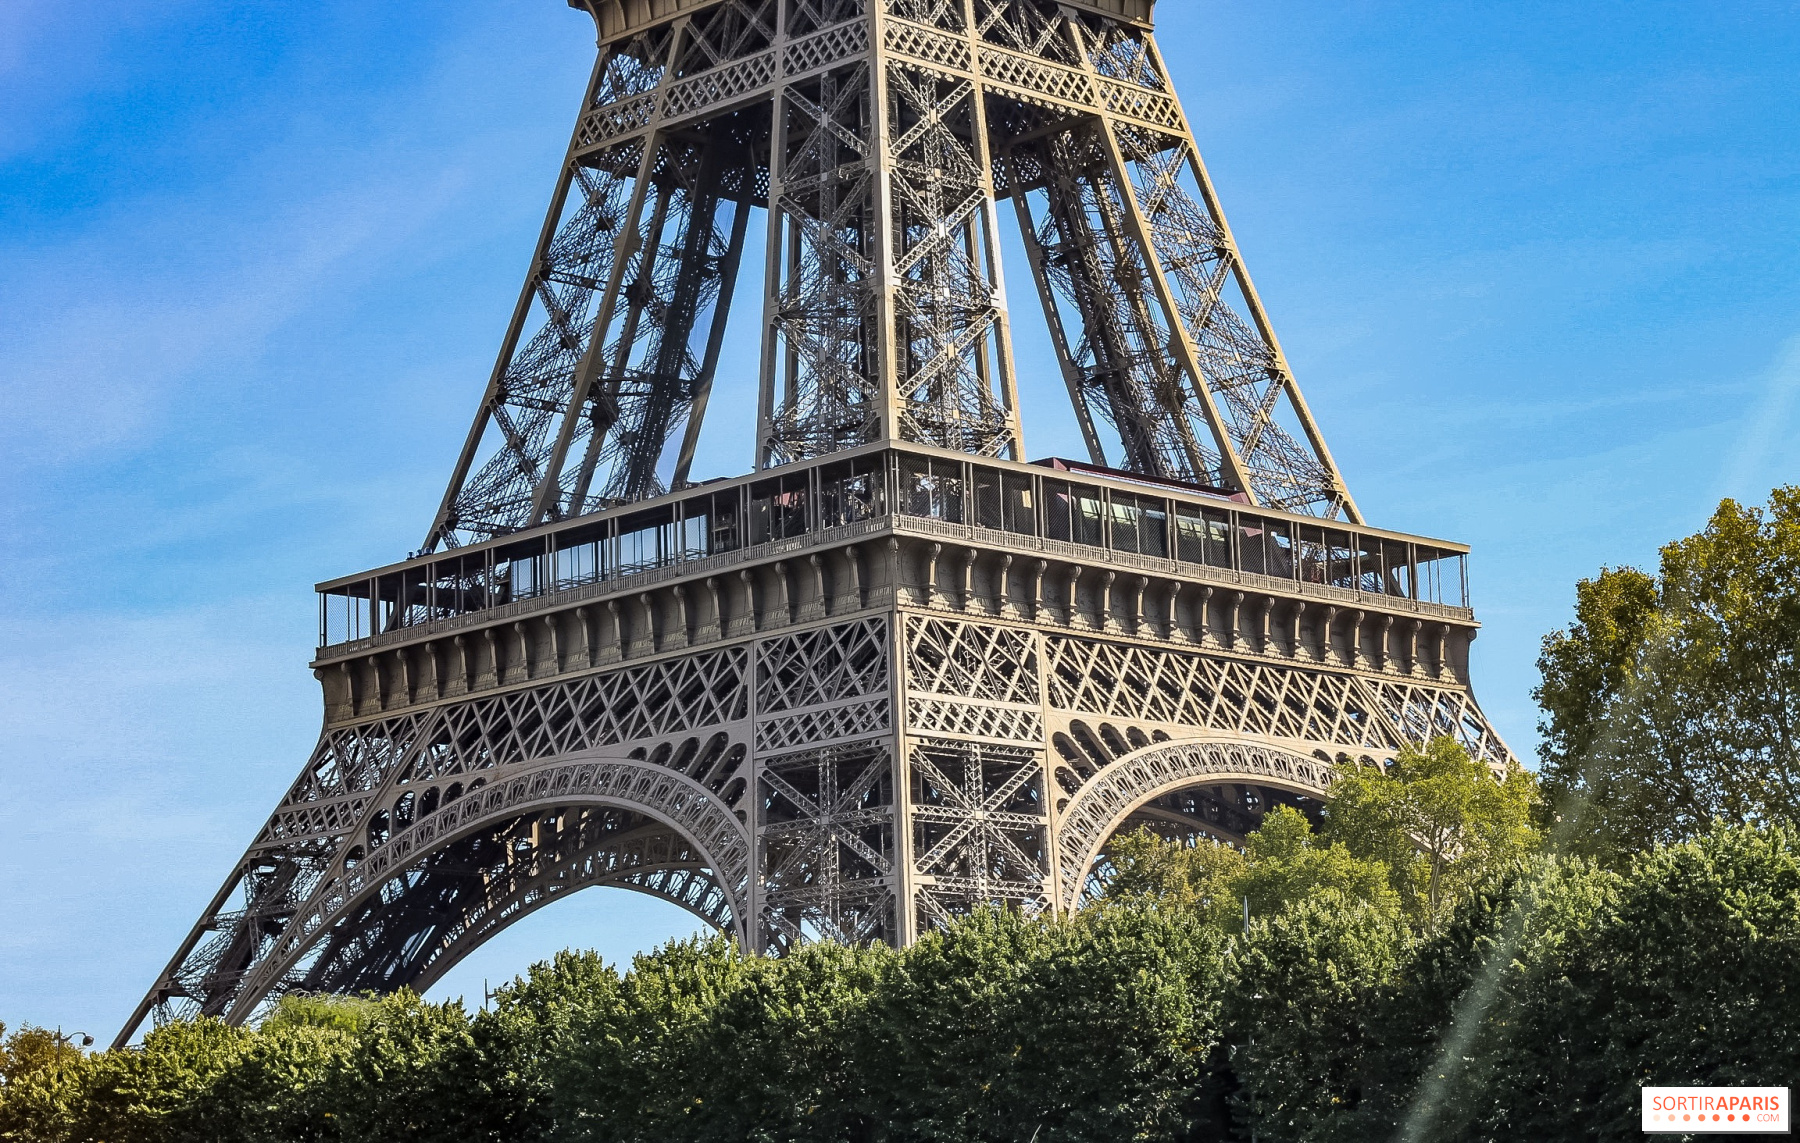 Explore the top of the Eiffel Tower - OFFICIAL website